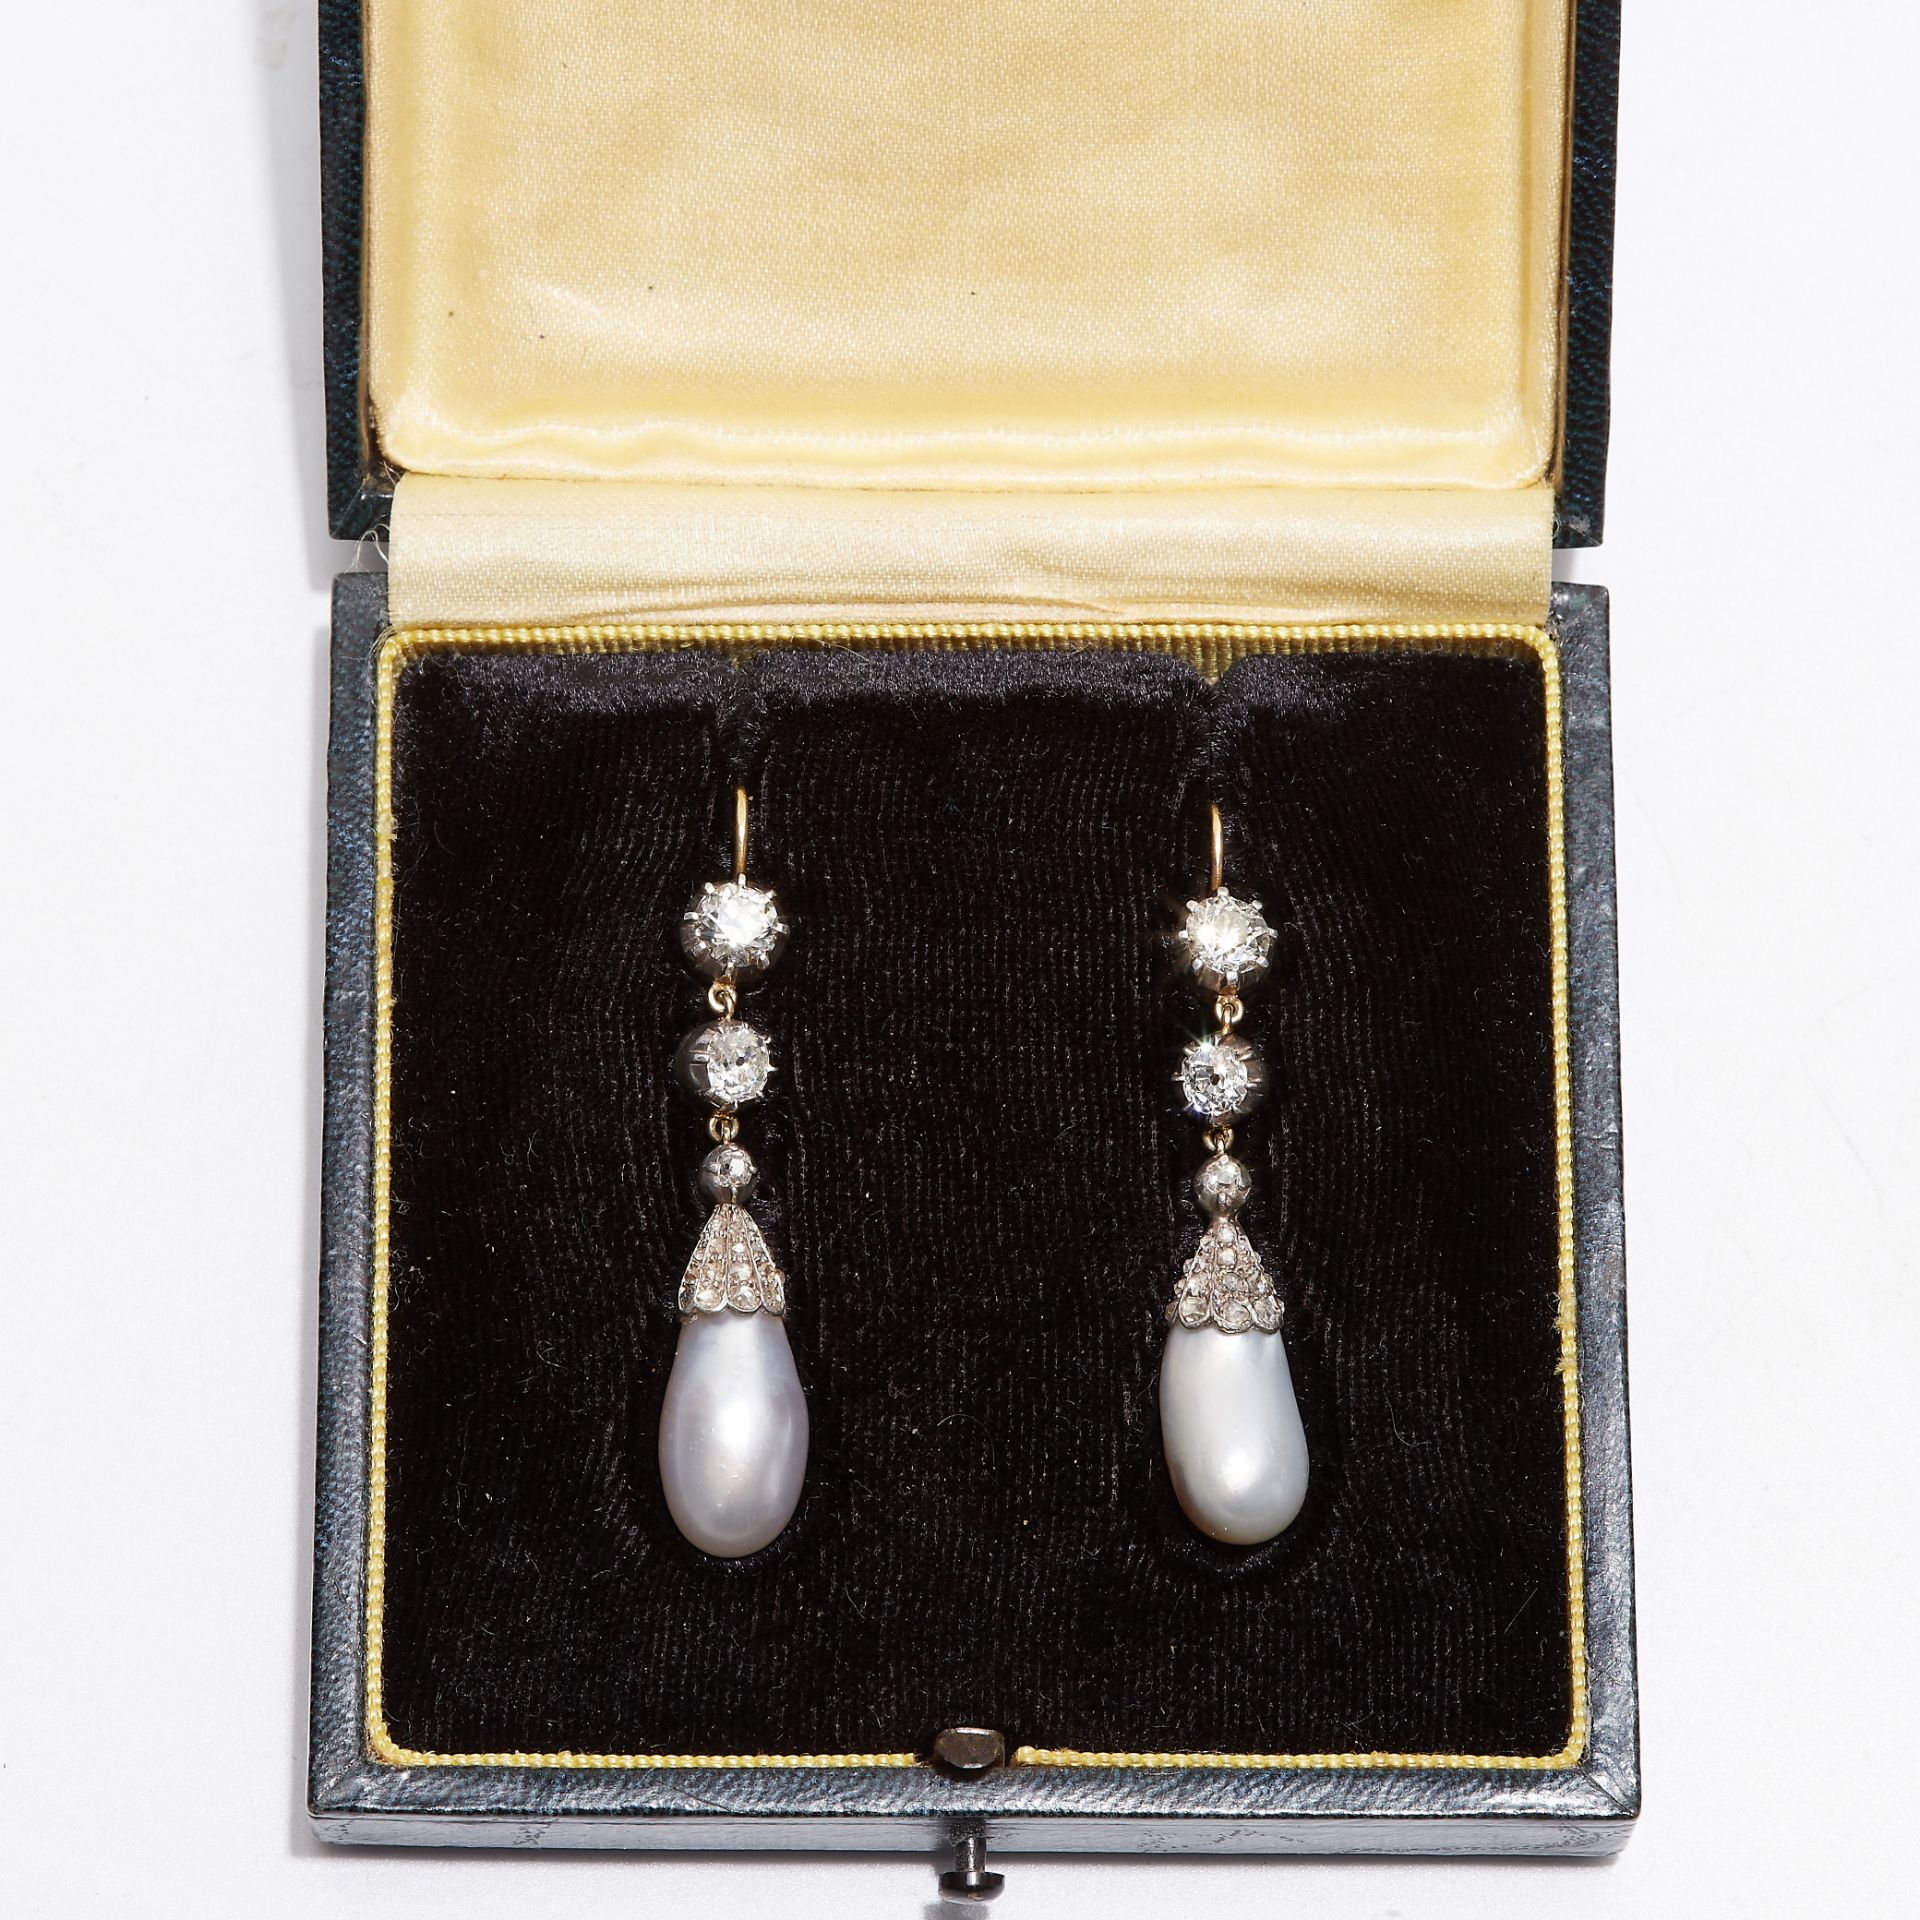 IMPORTANT PAIR OF NATURAL PEARL AND DIAMOND DROP EARRINGS - Image 2 of 3